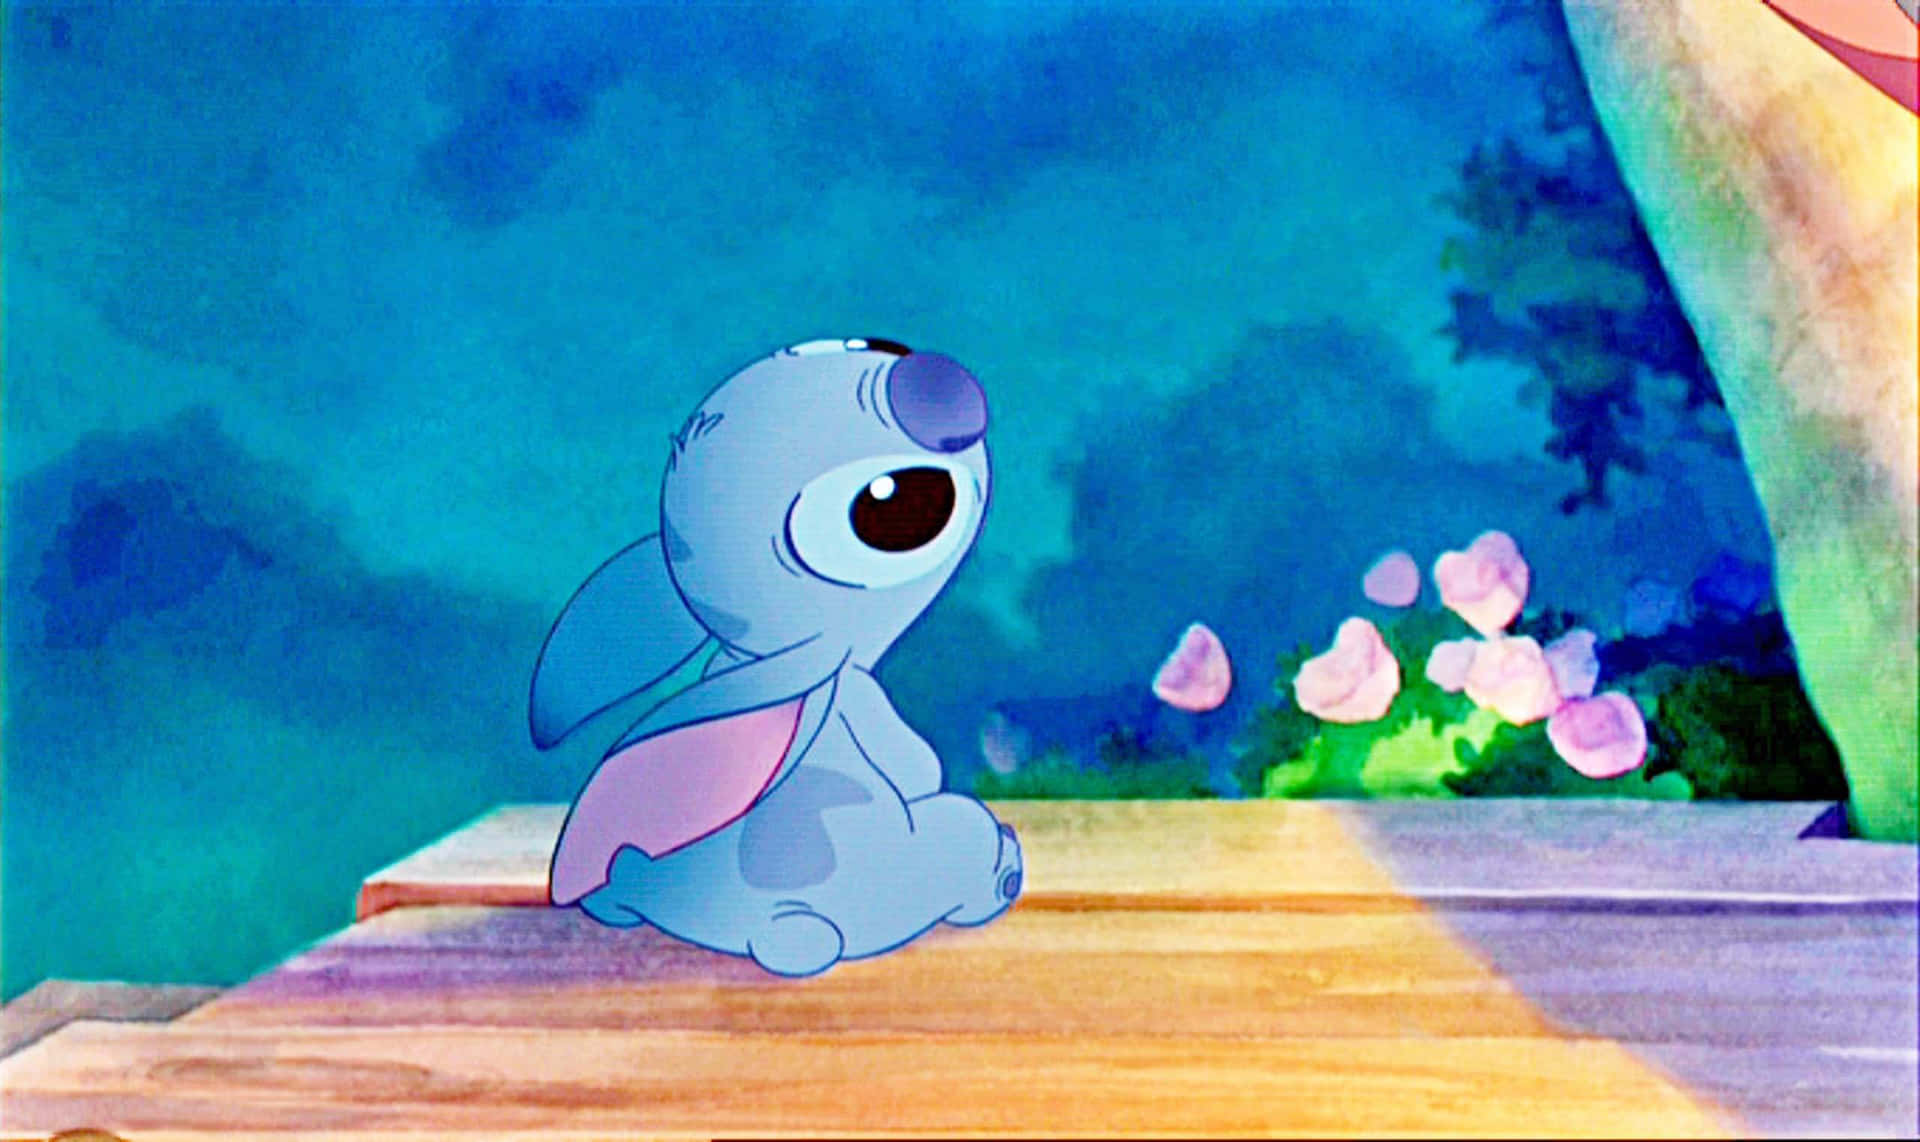 Sad Stitch looks wistfully at the stars, longing for a better tomorrow Wallpaper